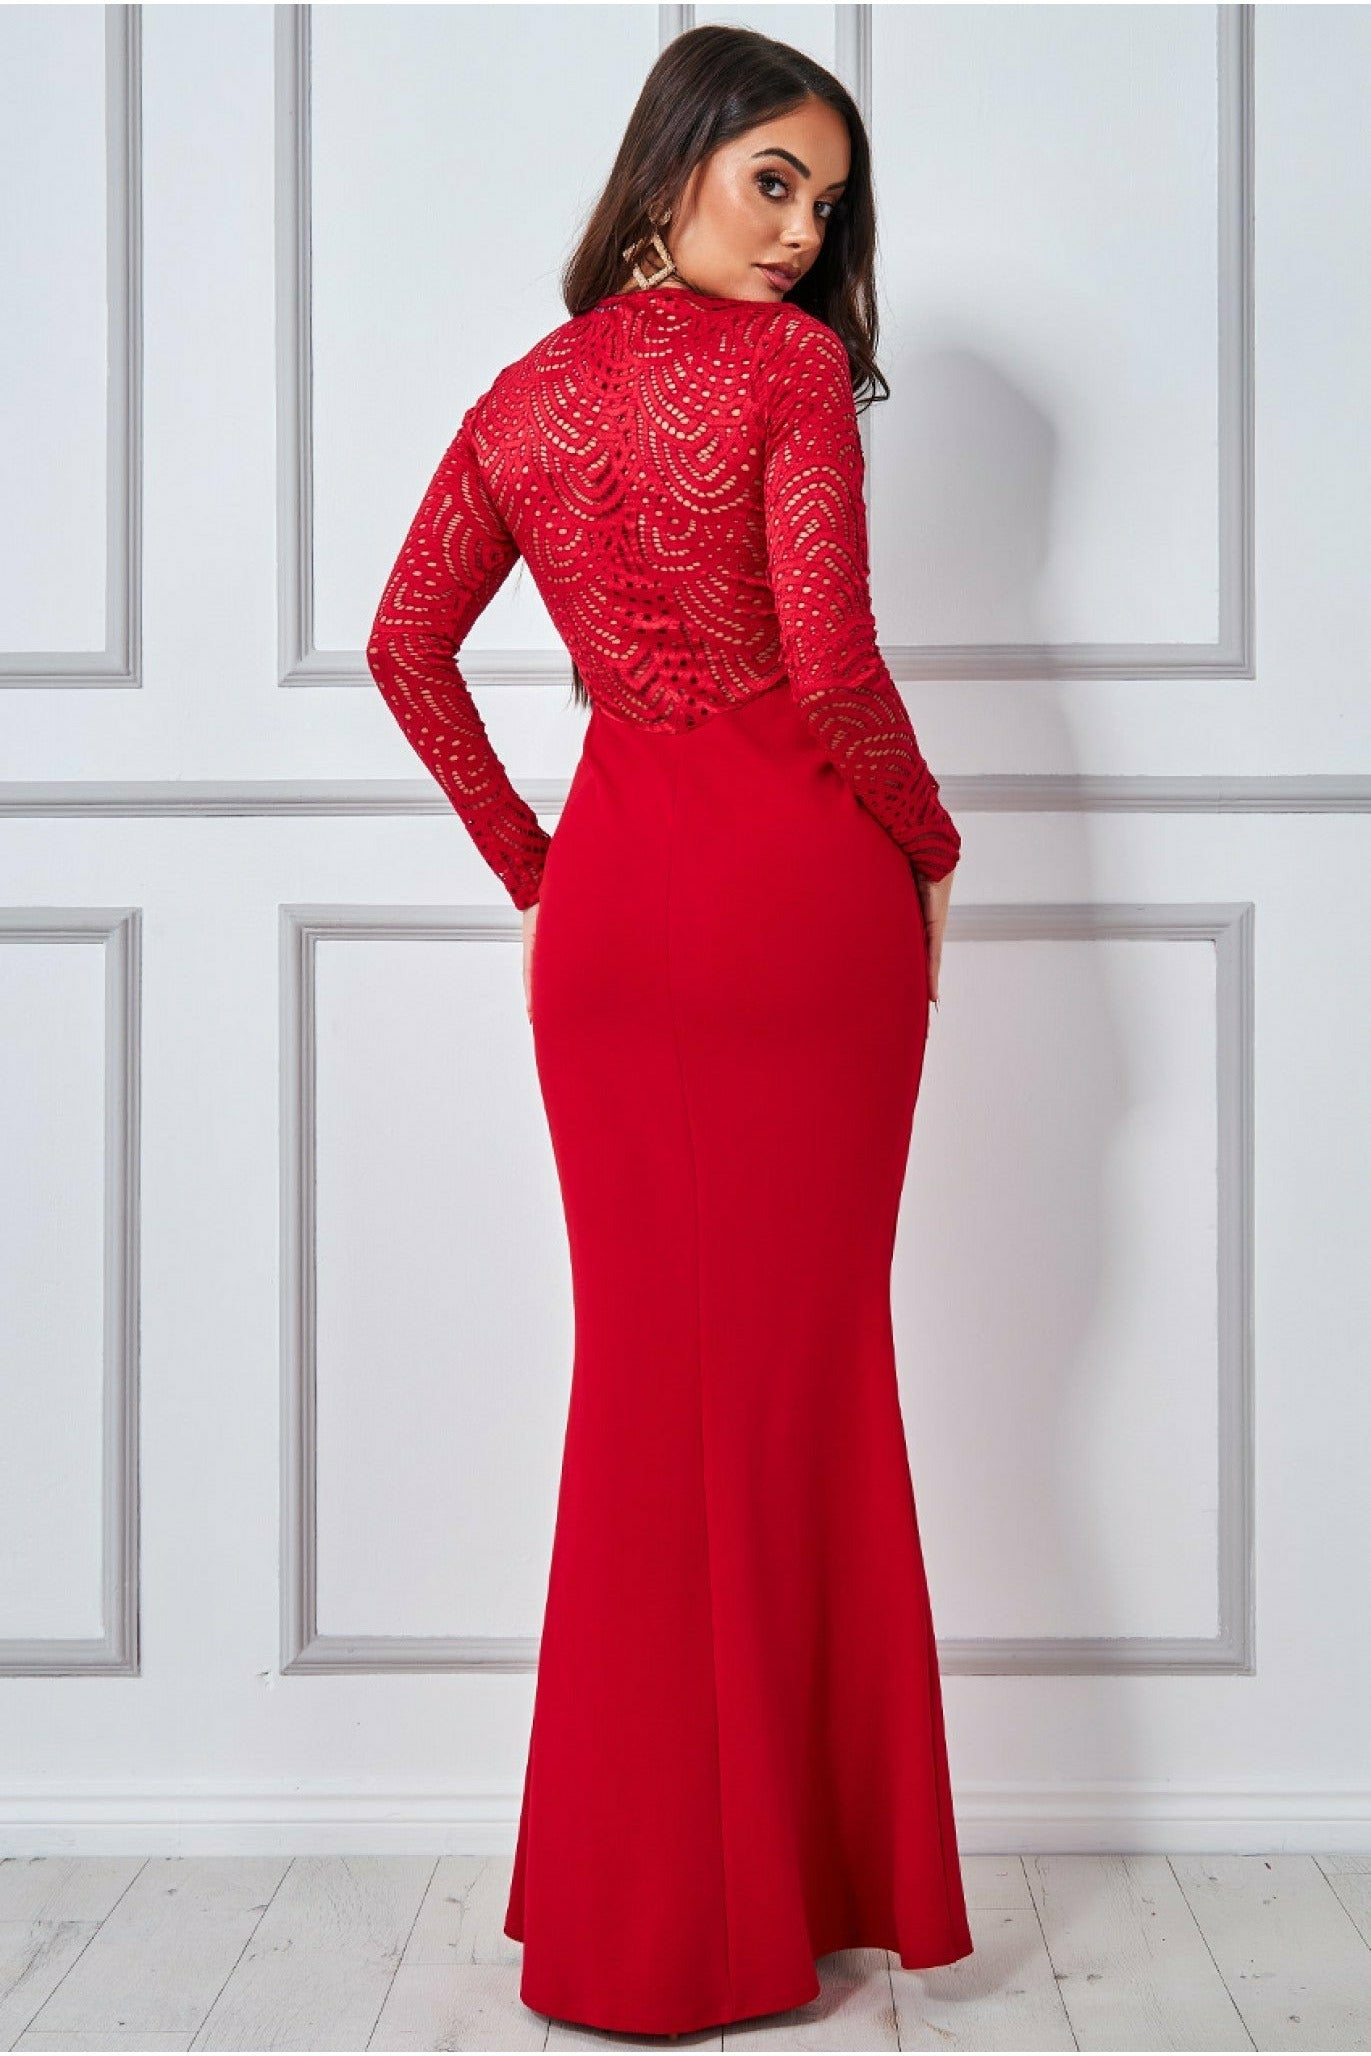 Lace Back Full Sleeve Maxi Dress - Red DR2870